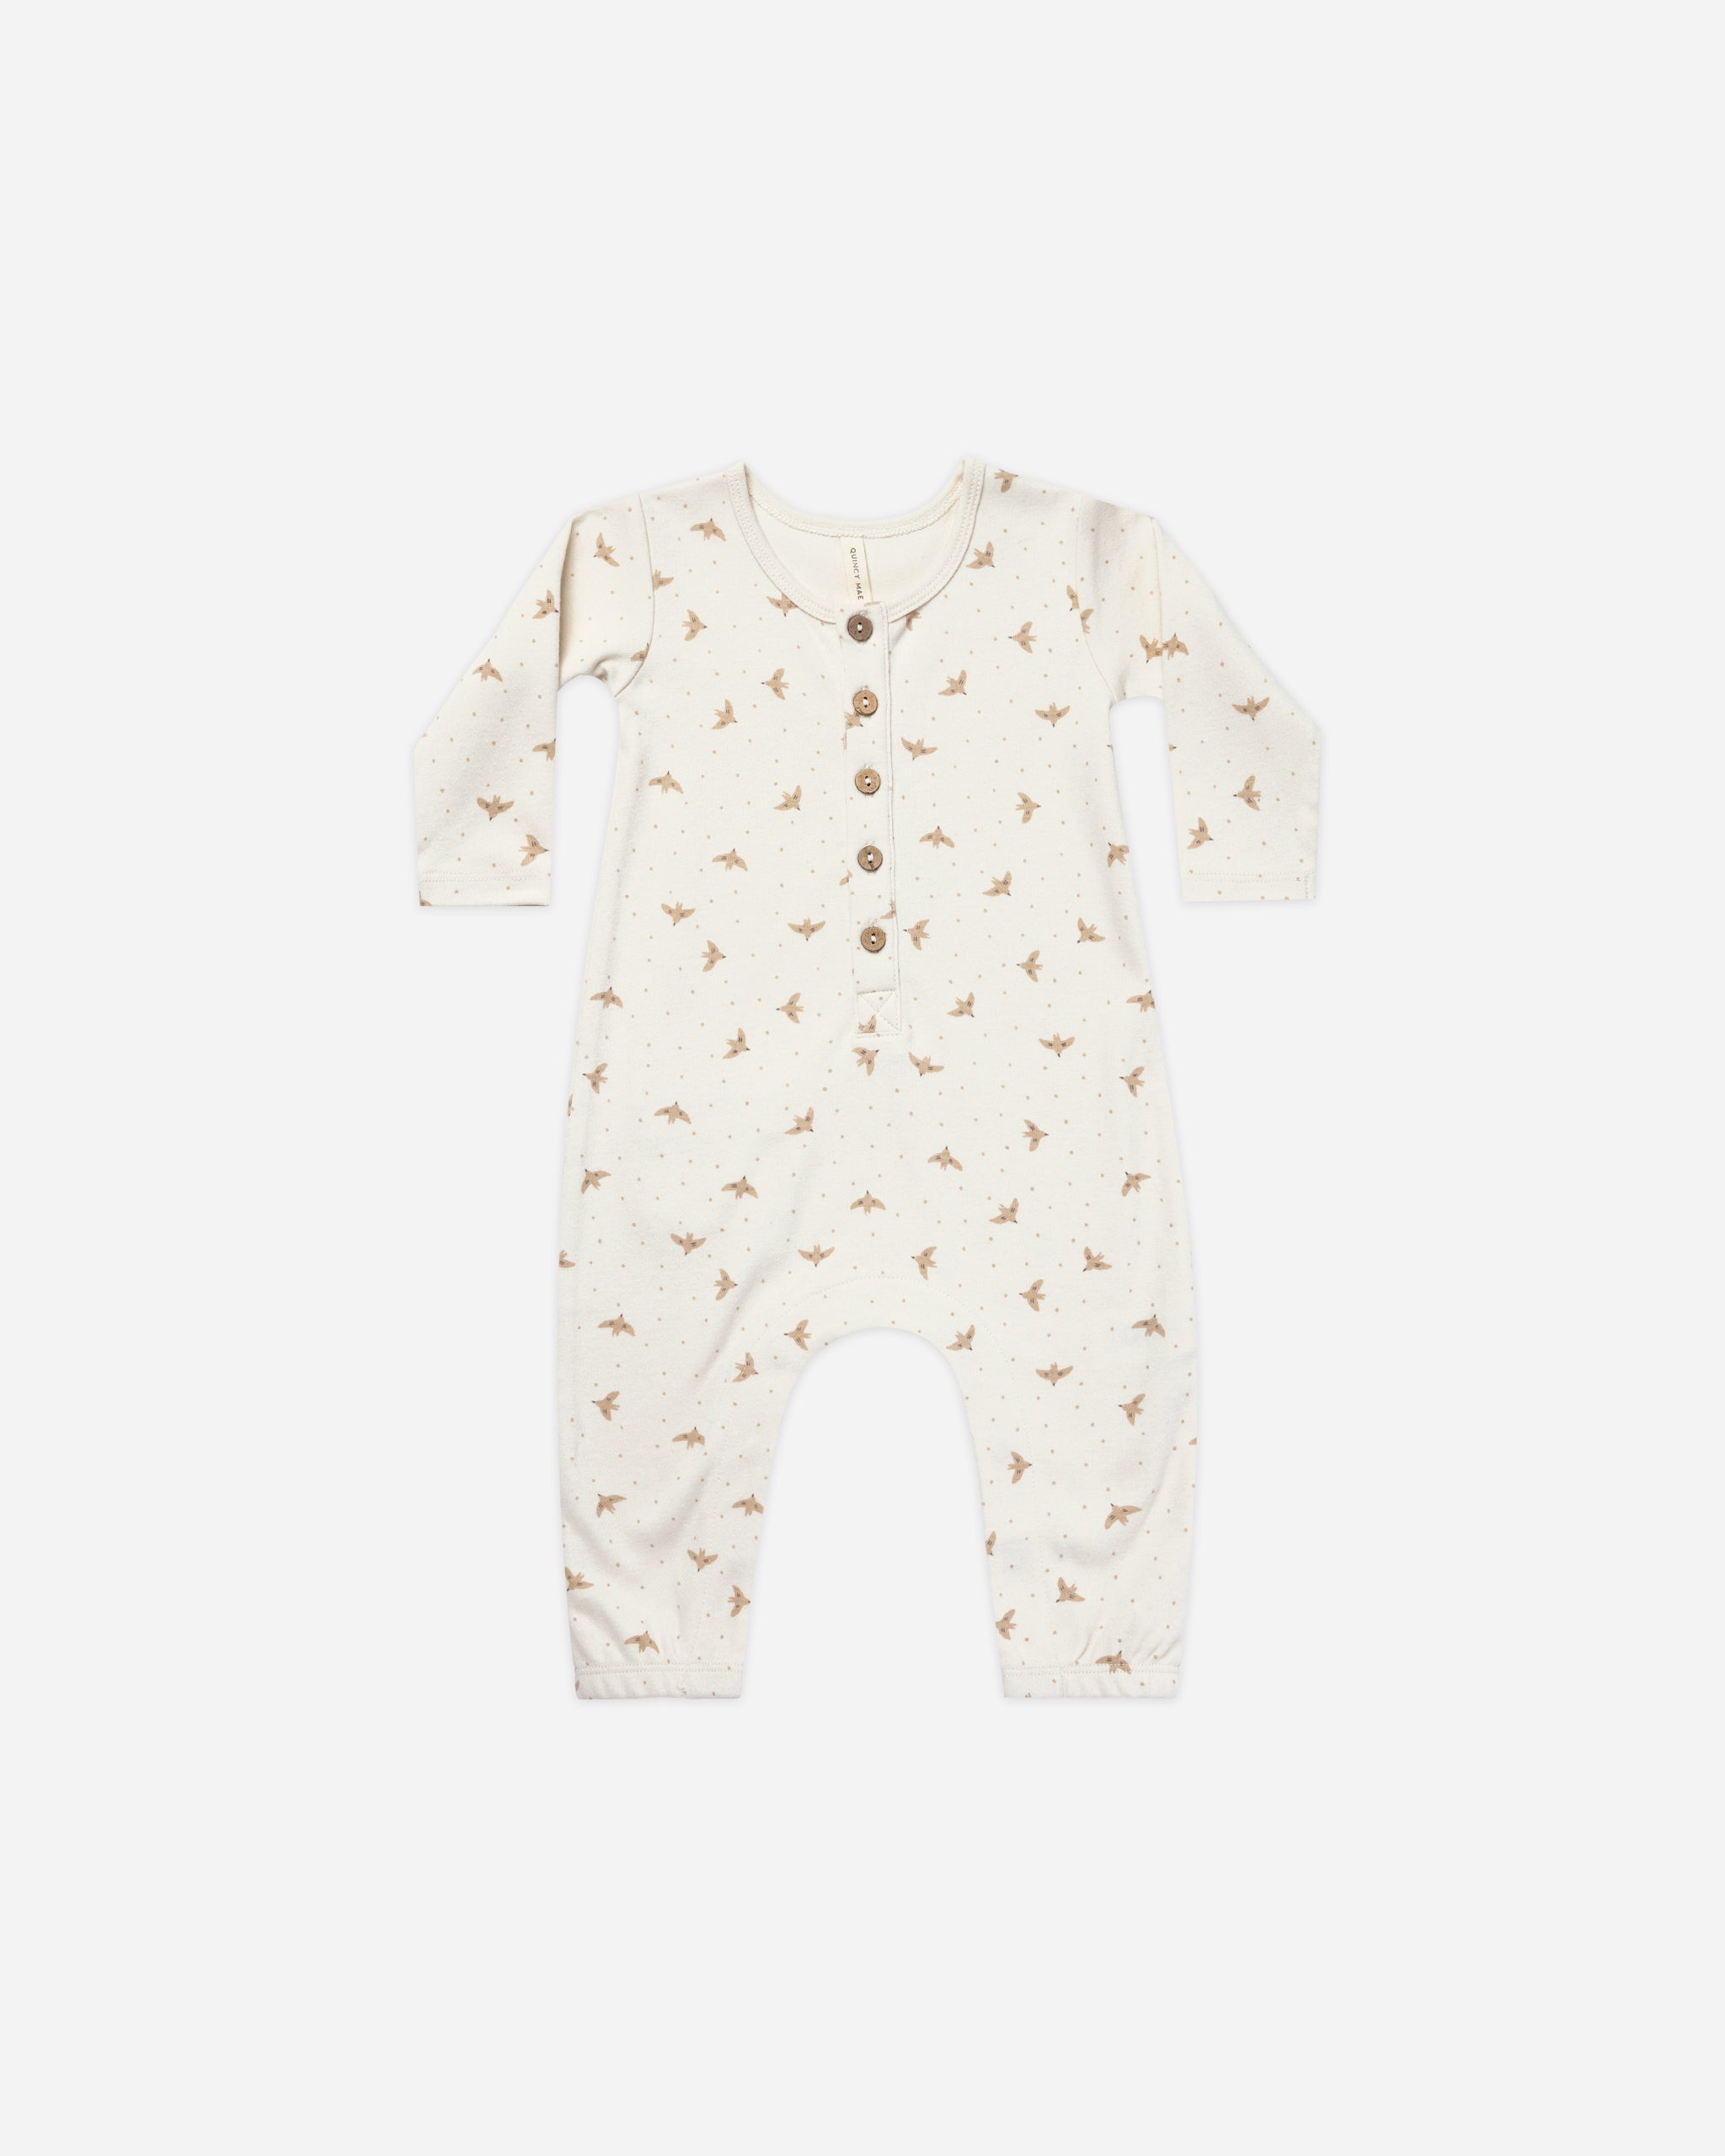 Long Sleeve Jumpsuit || Doves - Rylee + Cru | Kids Clothes | Trendy Baby Clothes | Modern Infant Outfits |